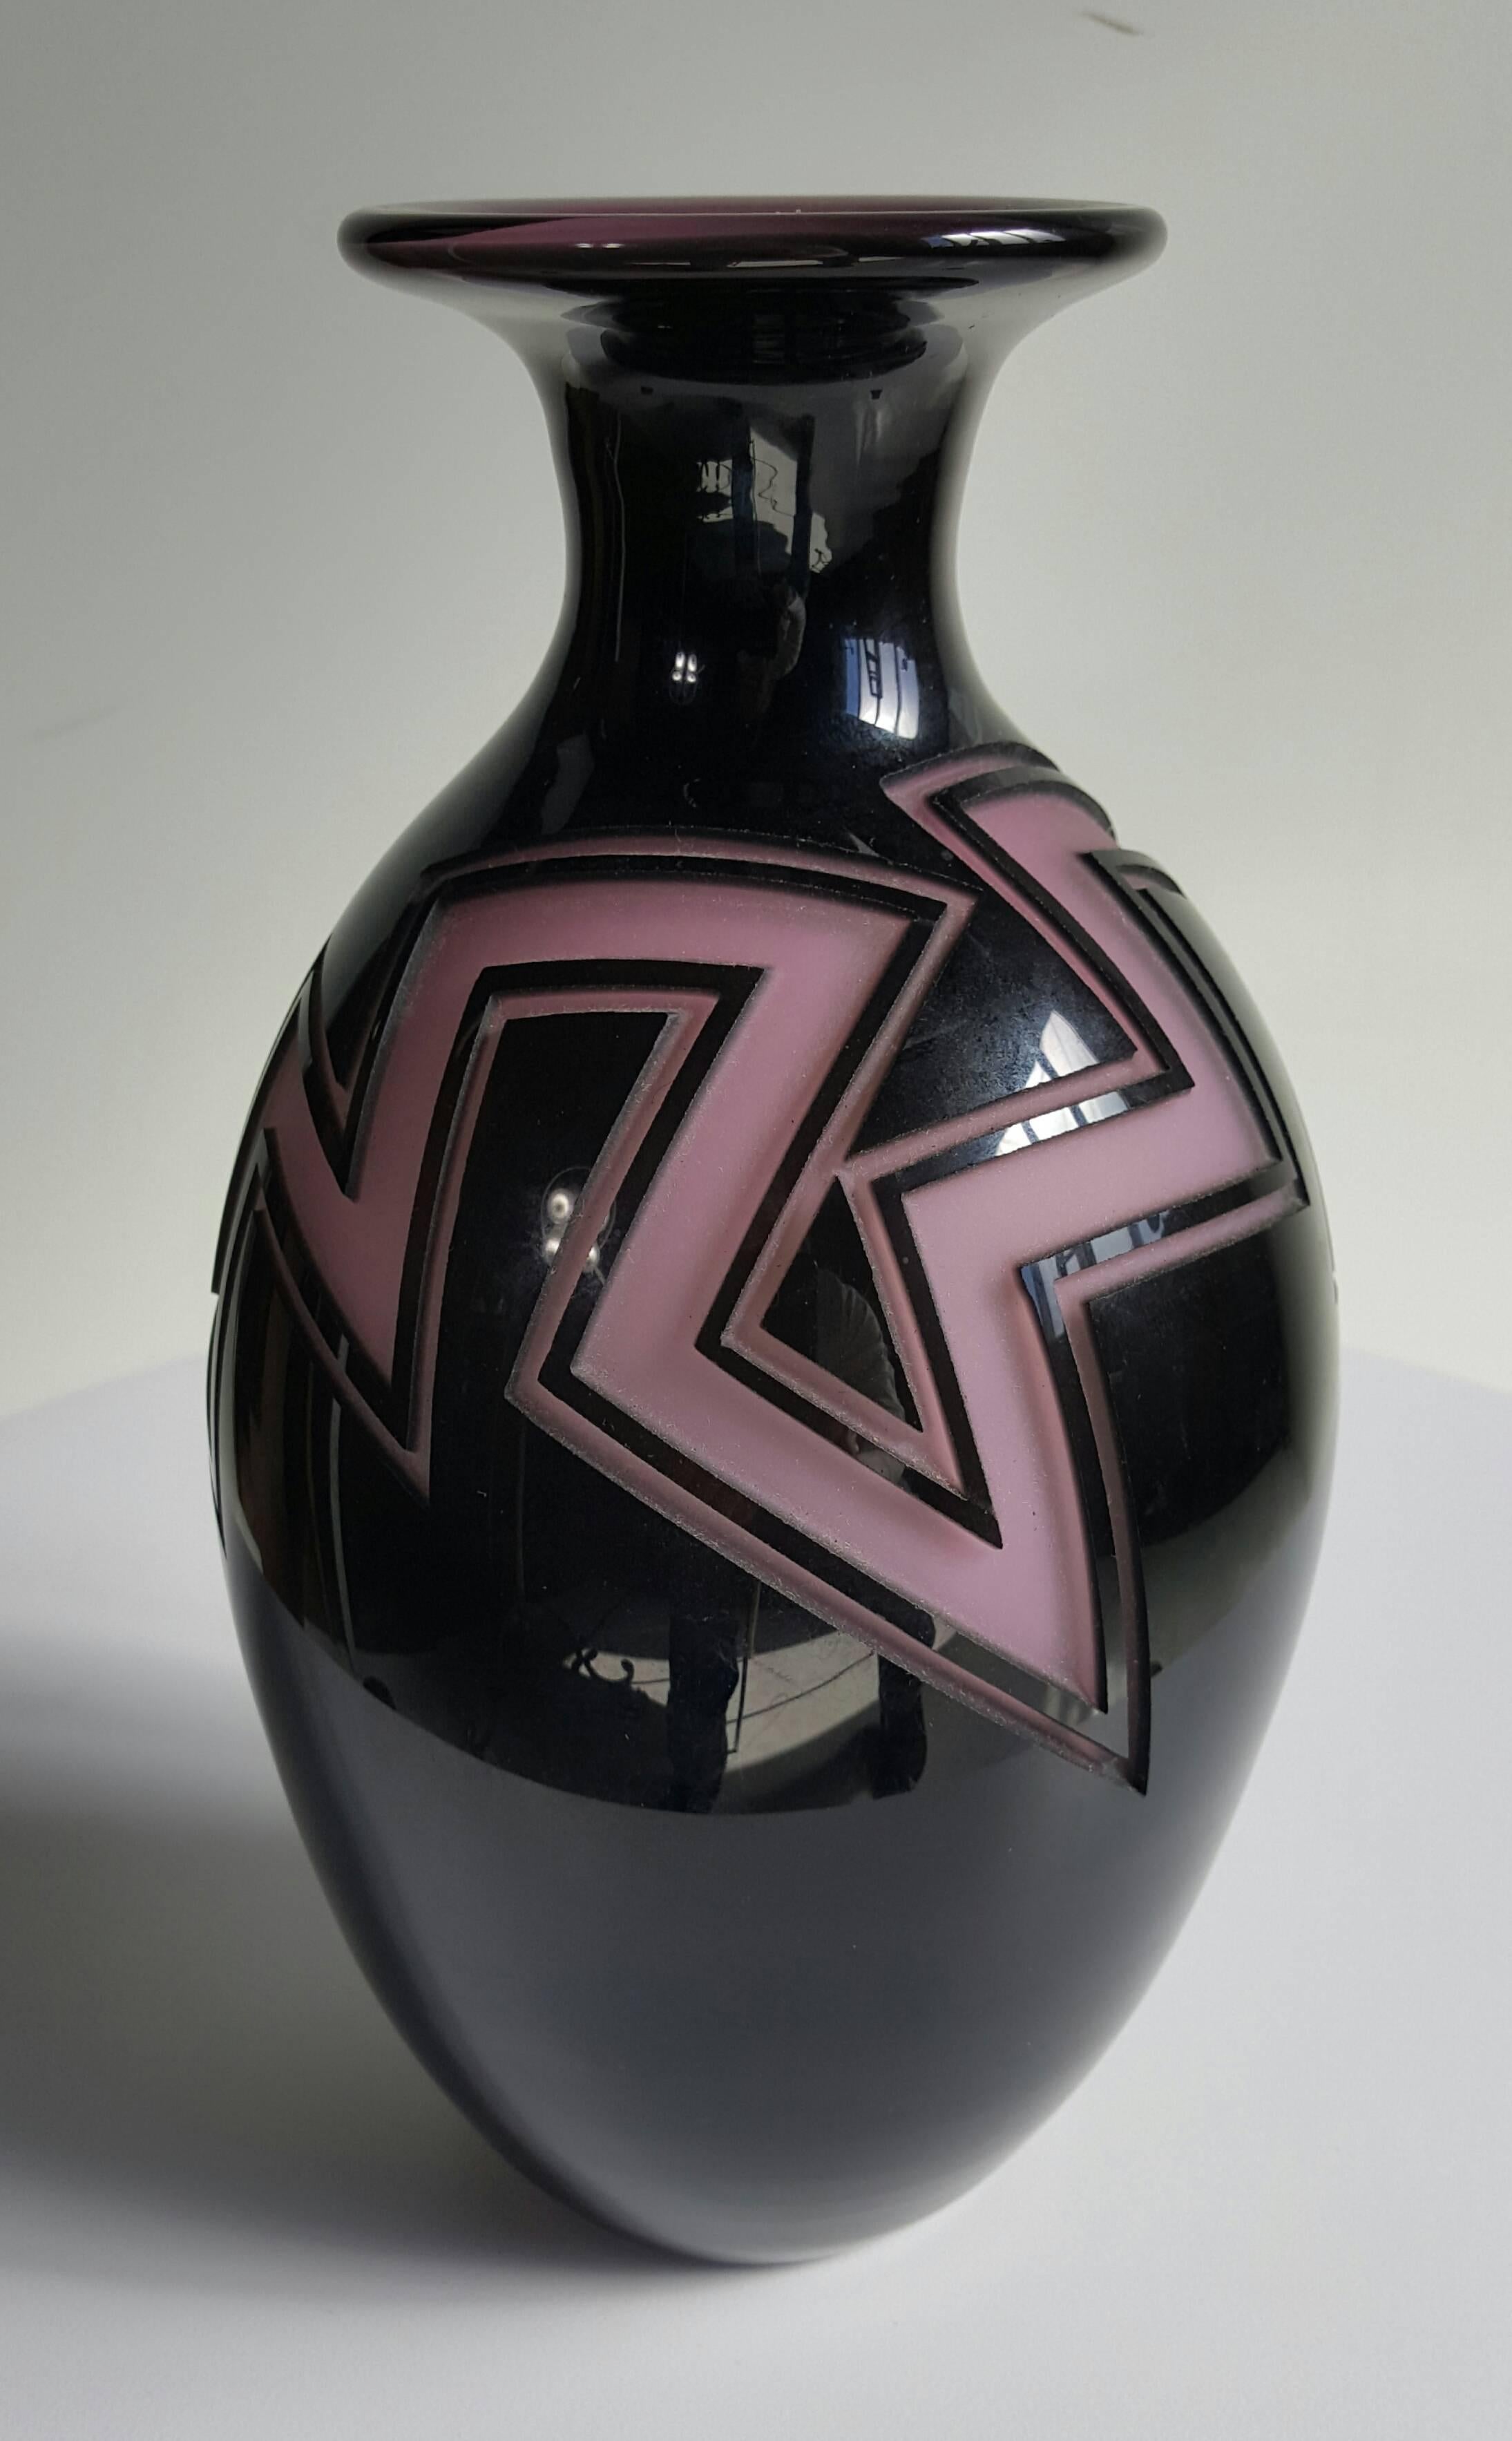 James Caswell Davis (American, 1930-2016), Correia Art Glass Vase, 1986 CE. A stunning Correia art glass vase free-blown into an ovoid shape, from a beautiful translucent blue glass, and decorated with a garnet-etched geometric pattern. This piece